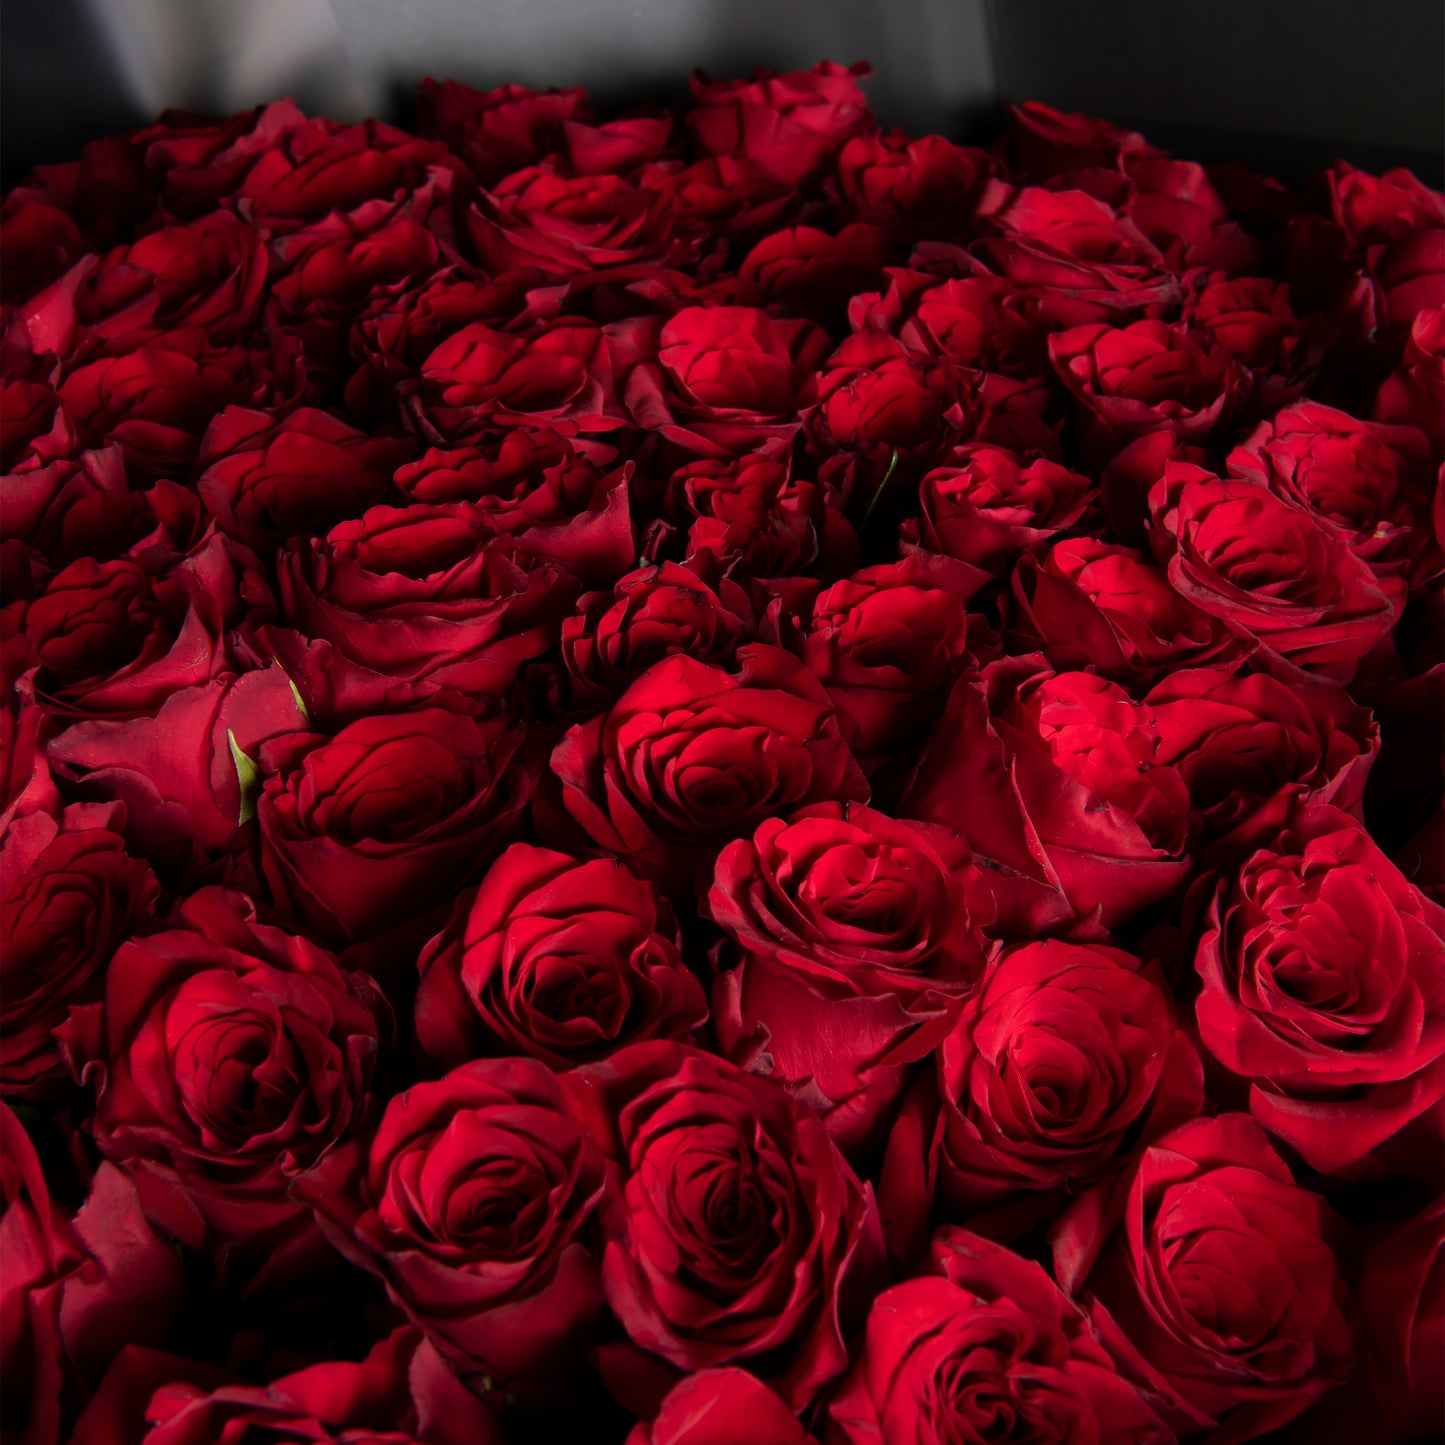 Bouquet of one hundred red roses